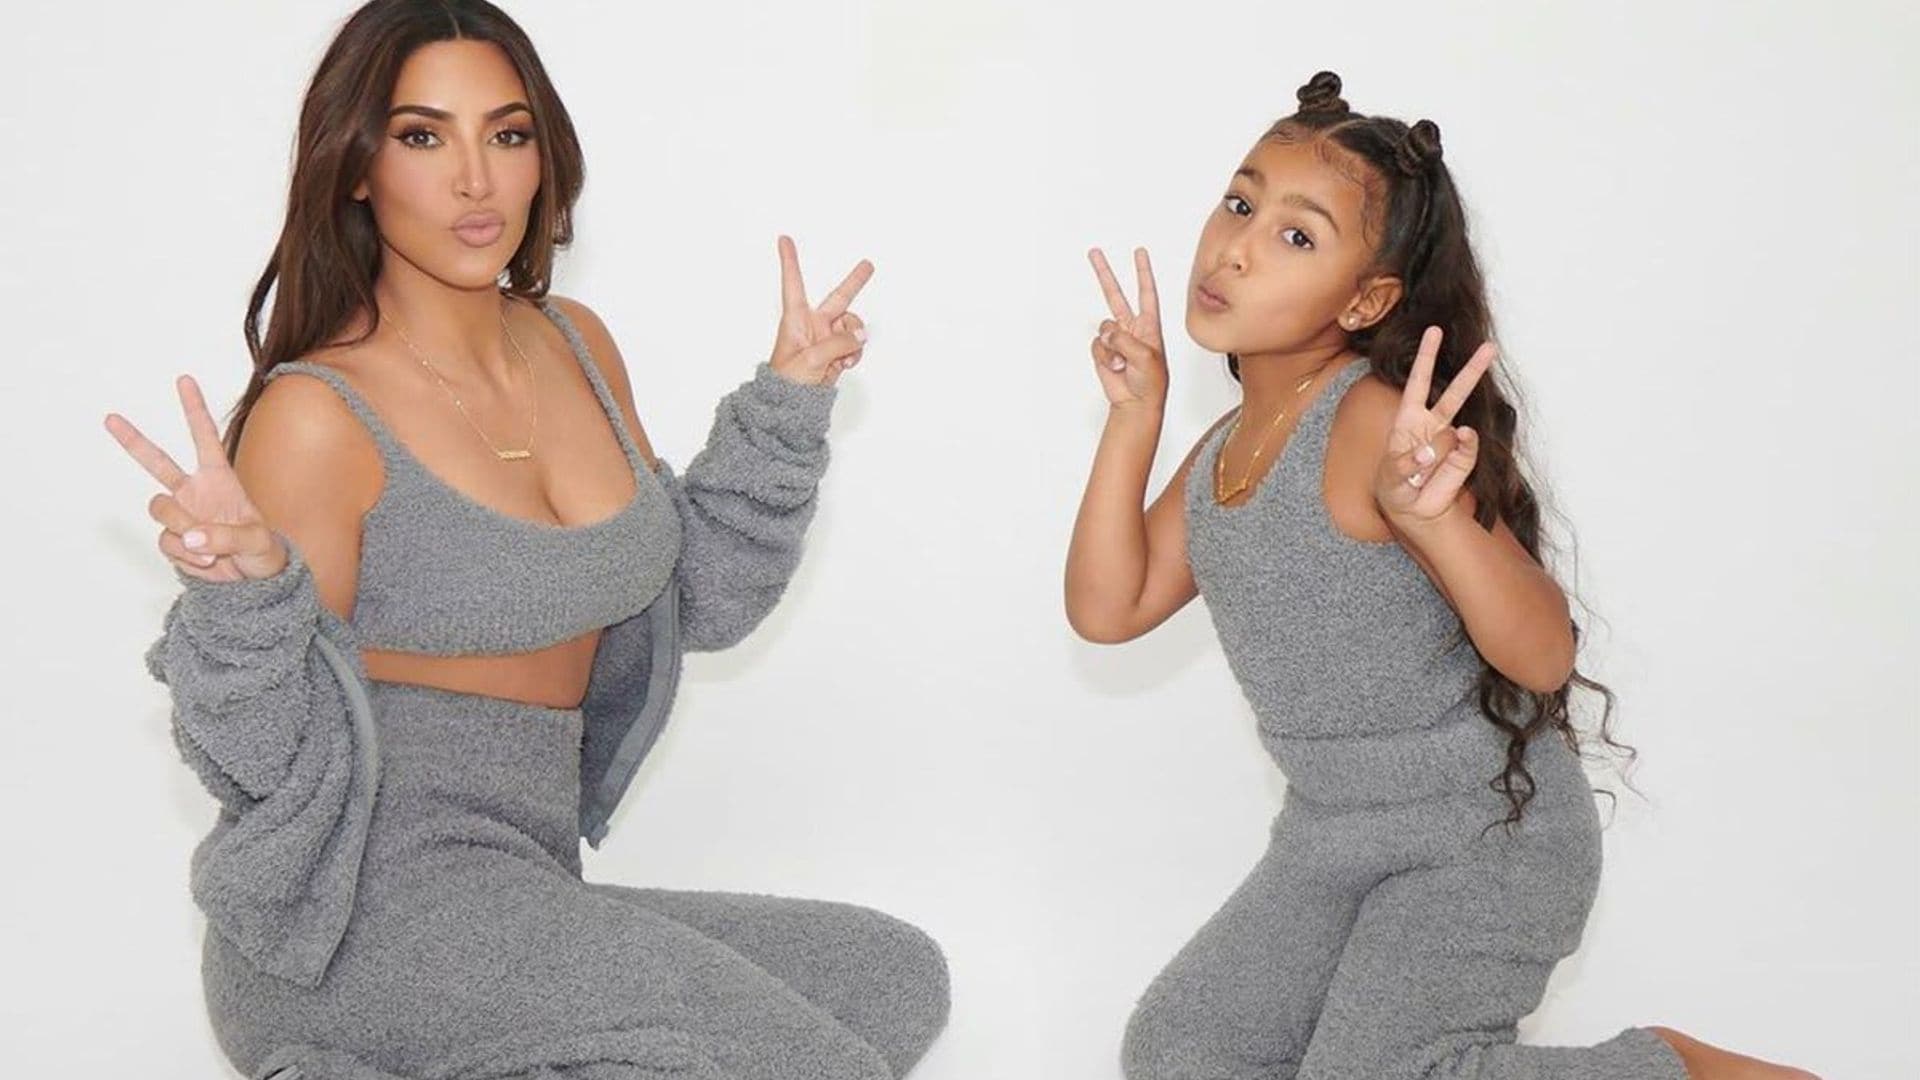 North West hilariously accuses Kim Kardashian of changing her voice on social media